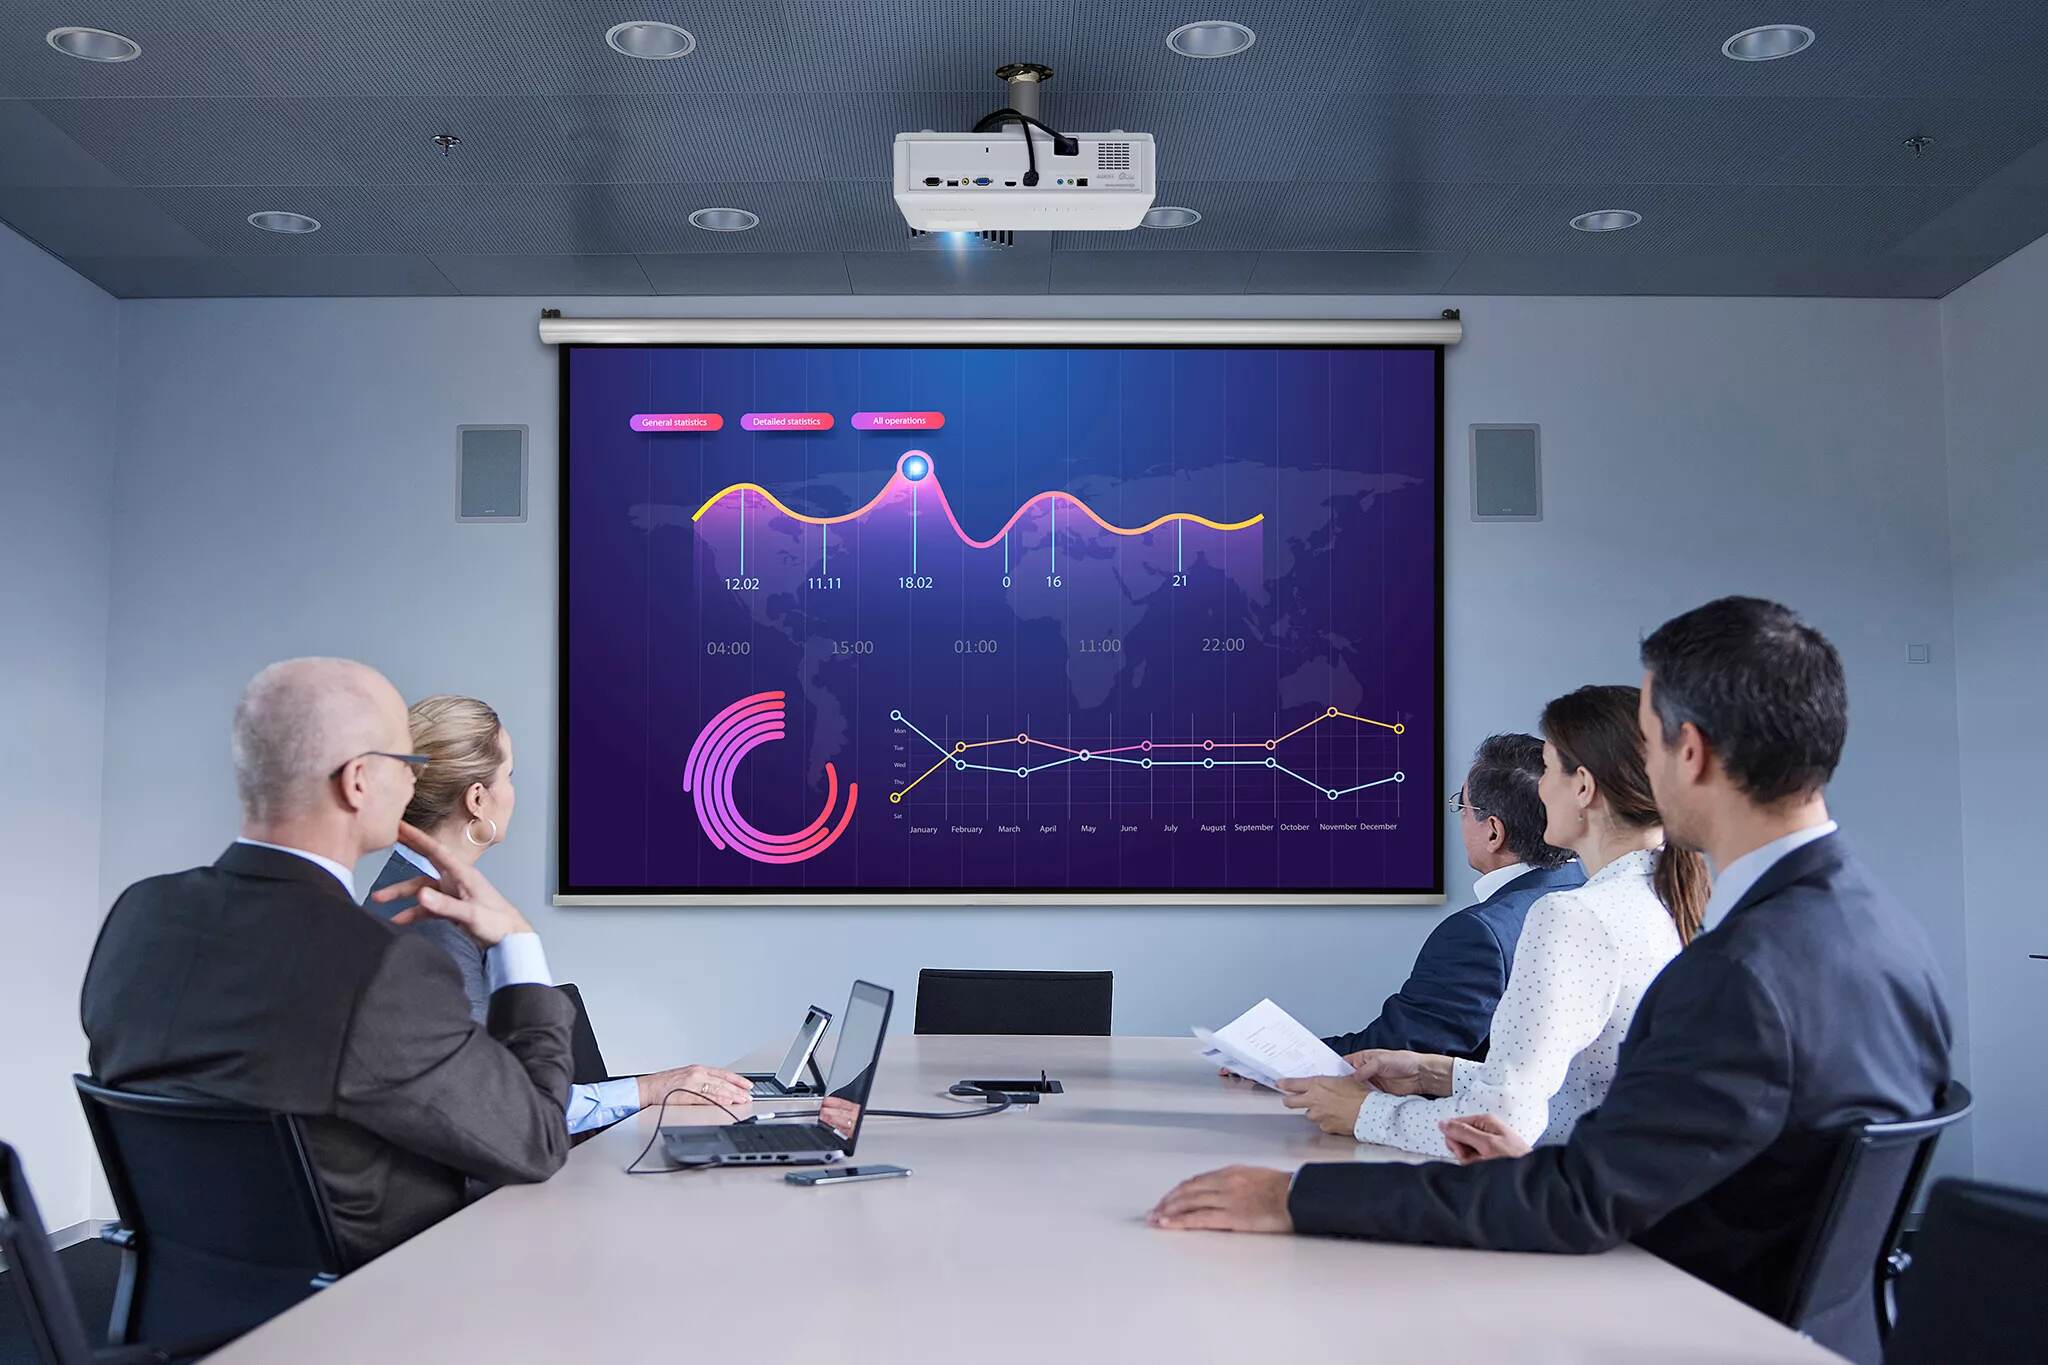 What To Look For In A Projector For Business